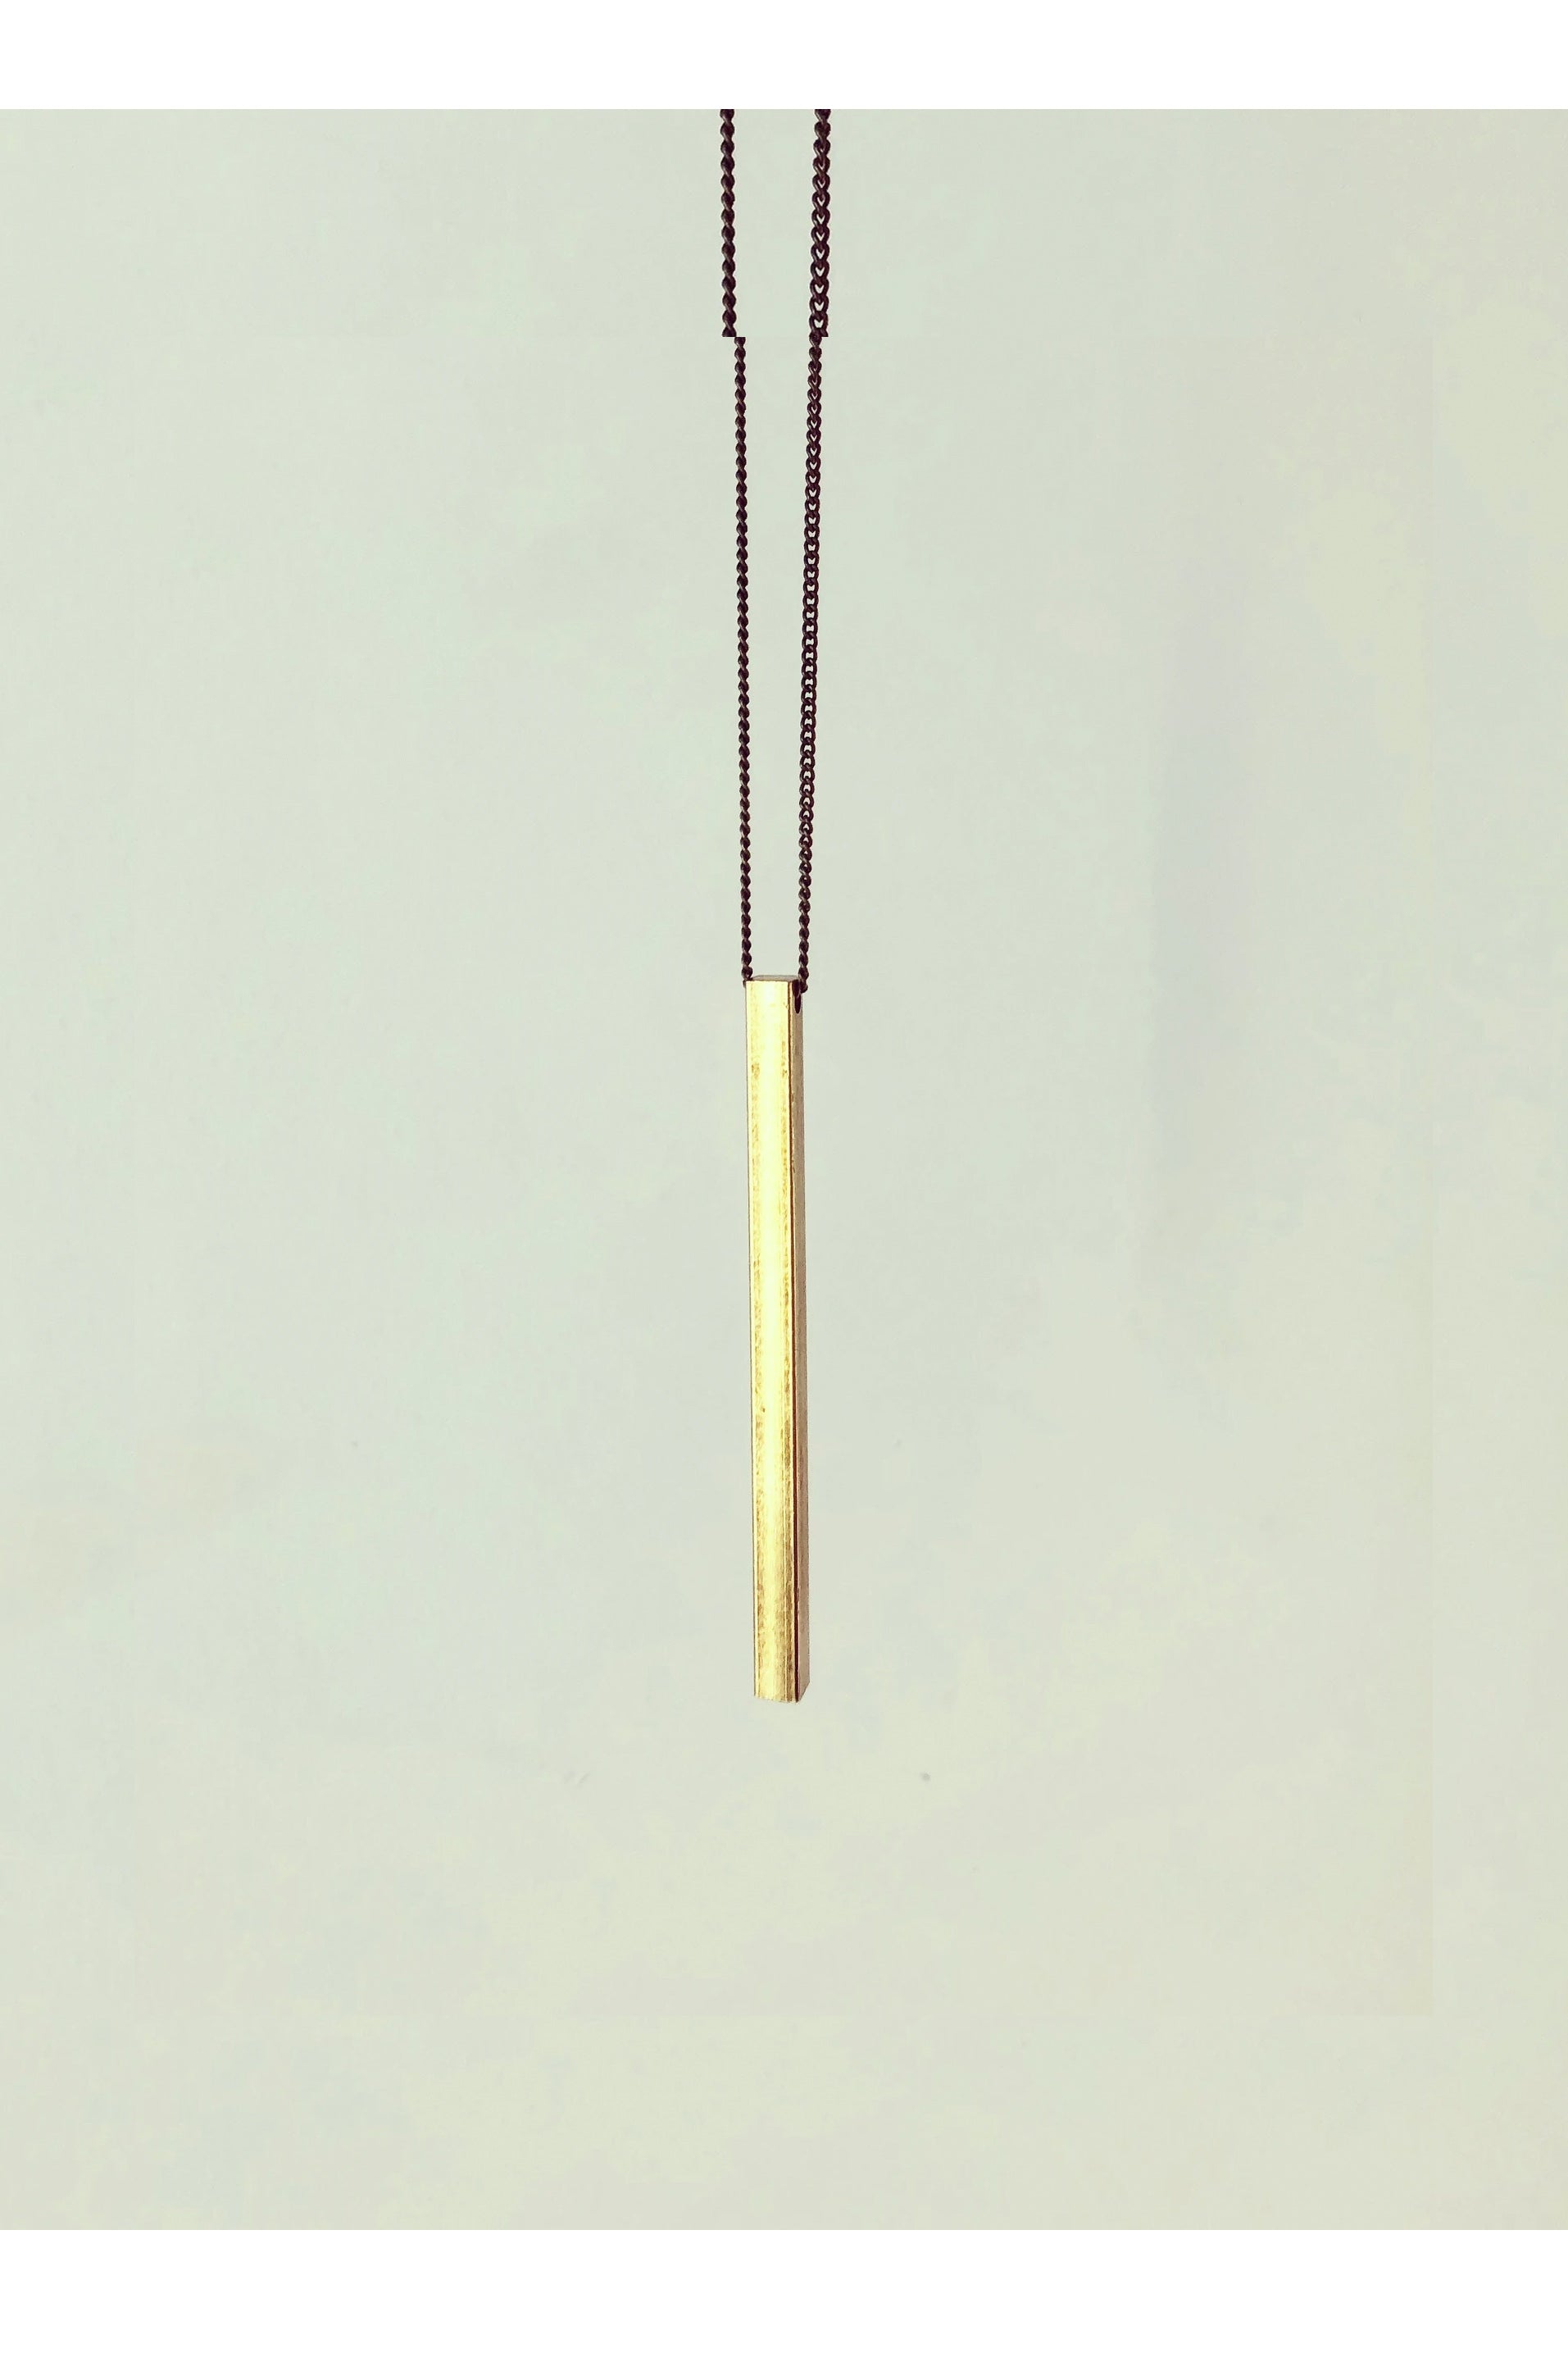 Slik necklace by Darlings of Denmark; raw brass; long solid bar; long chain; close-up shot